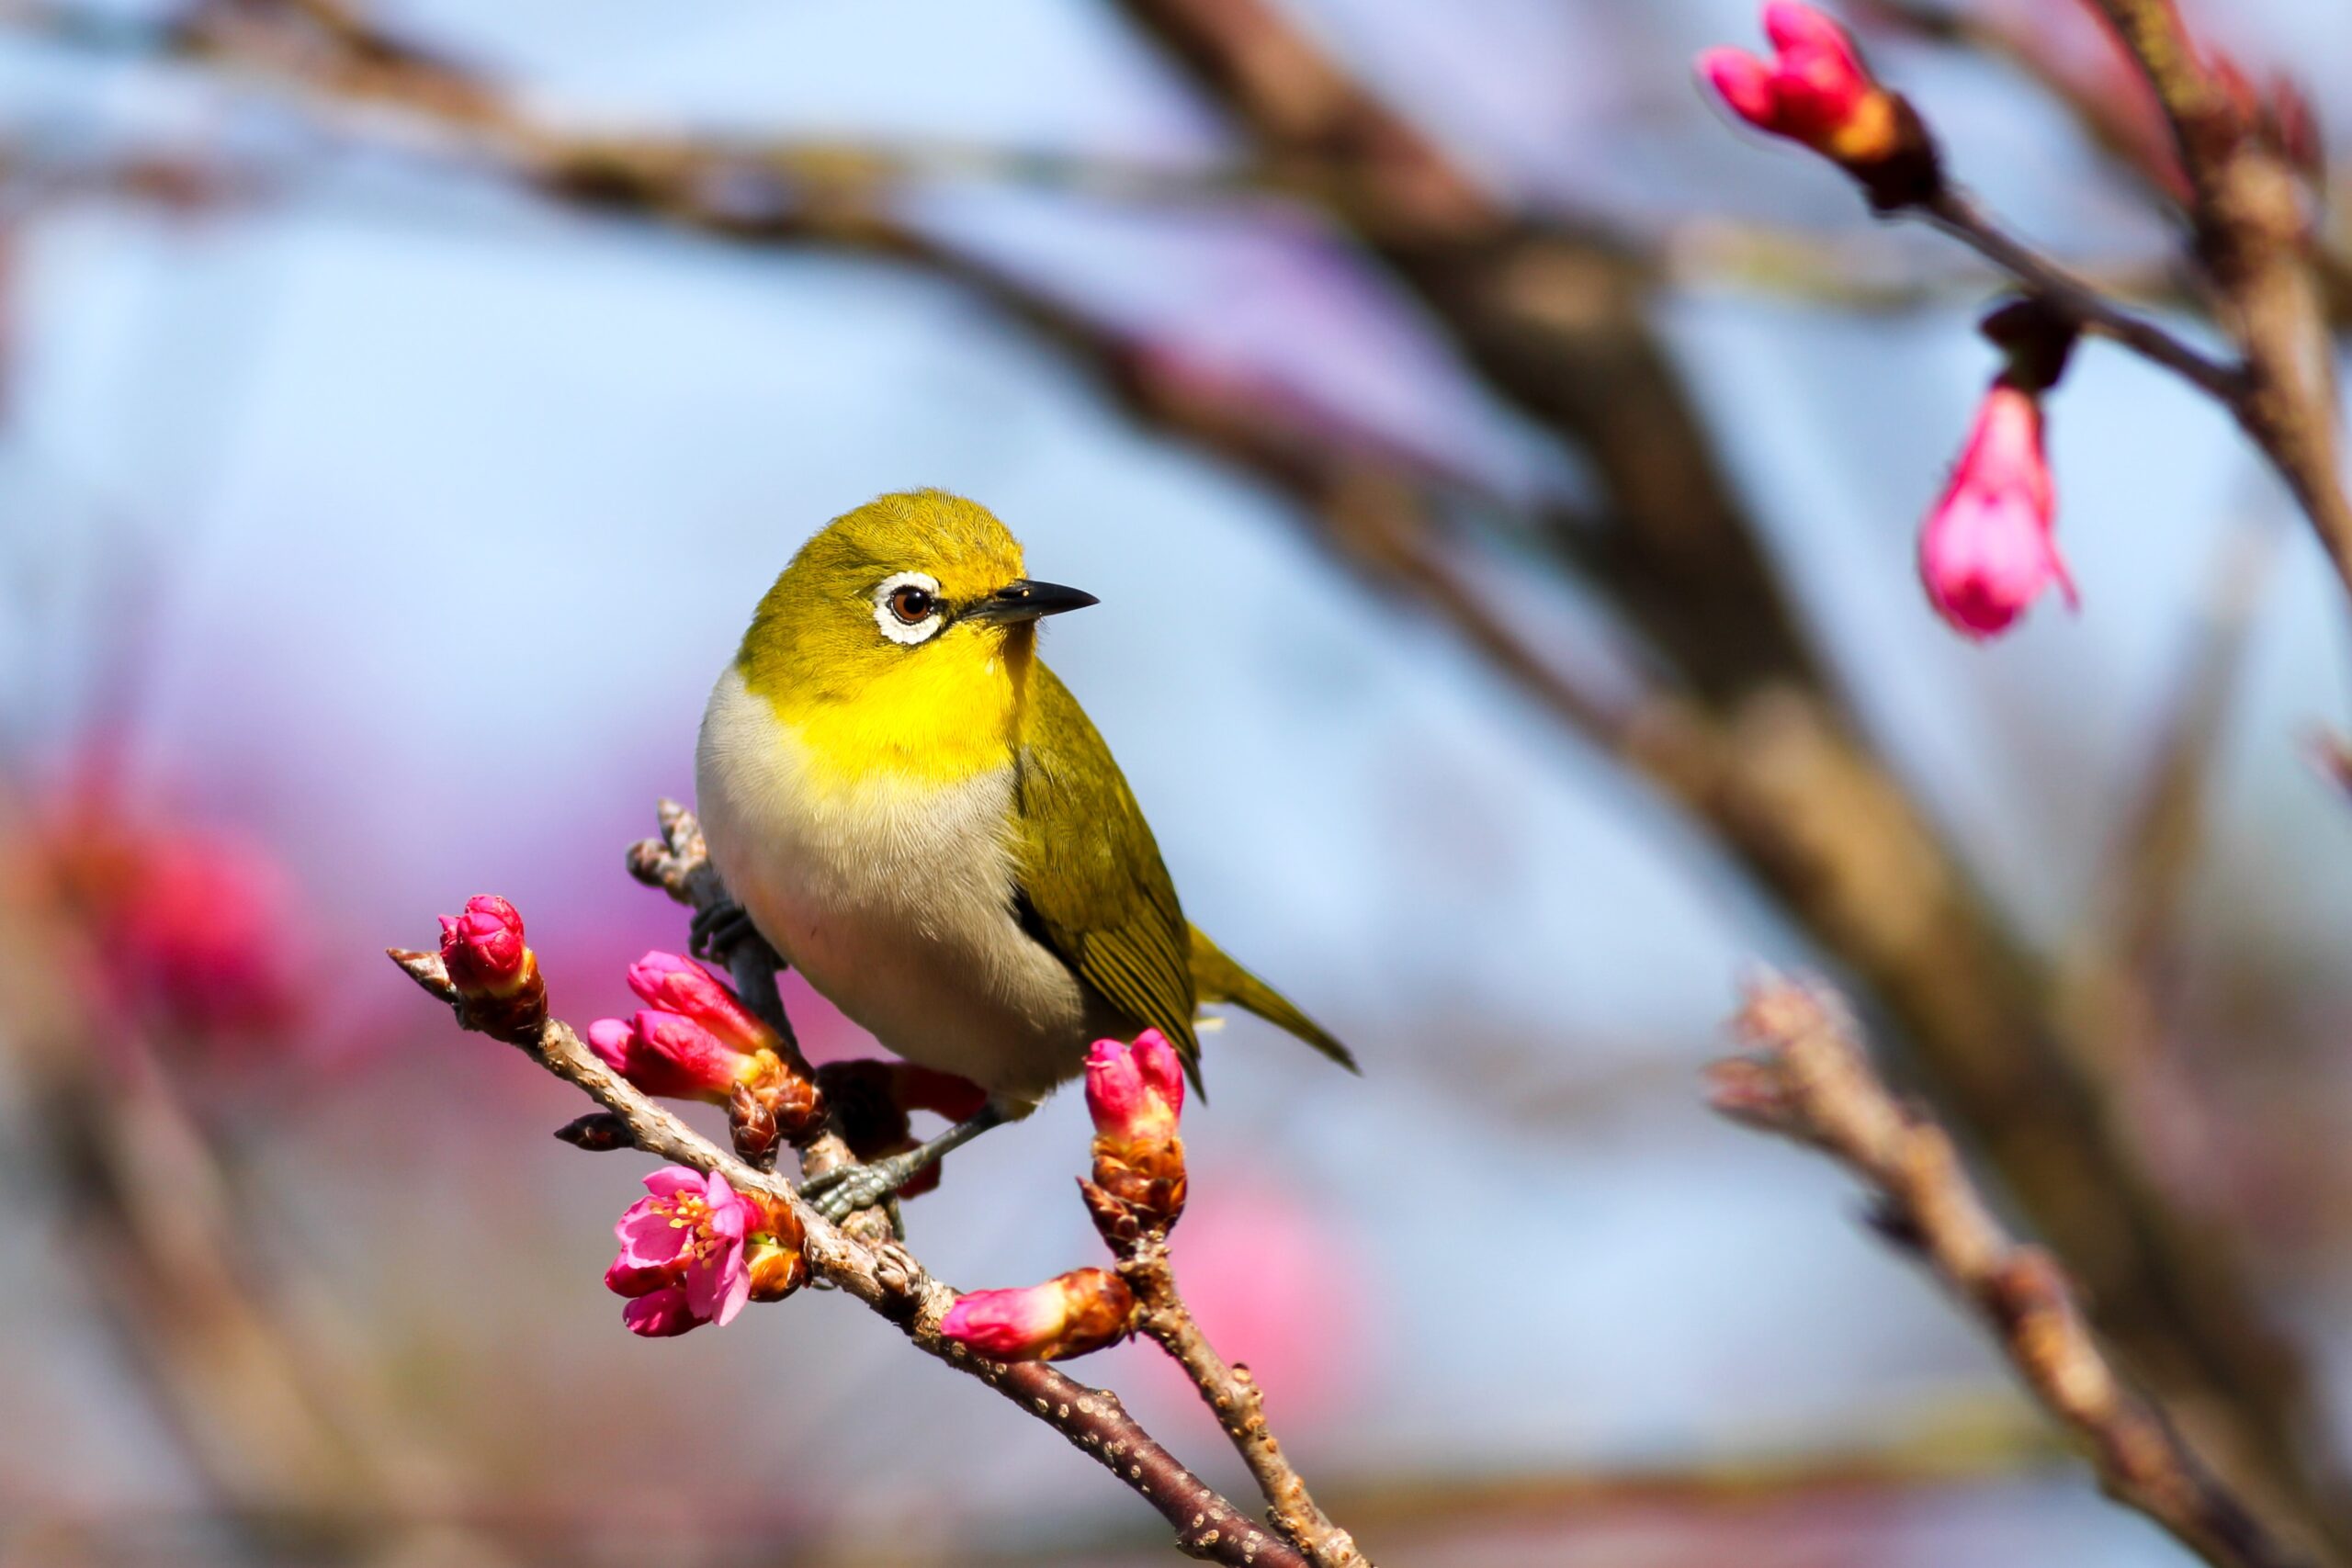 A yellow bird in a cherry blossom tree